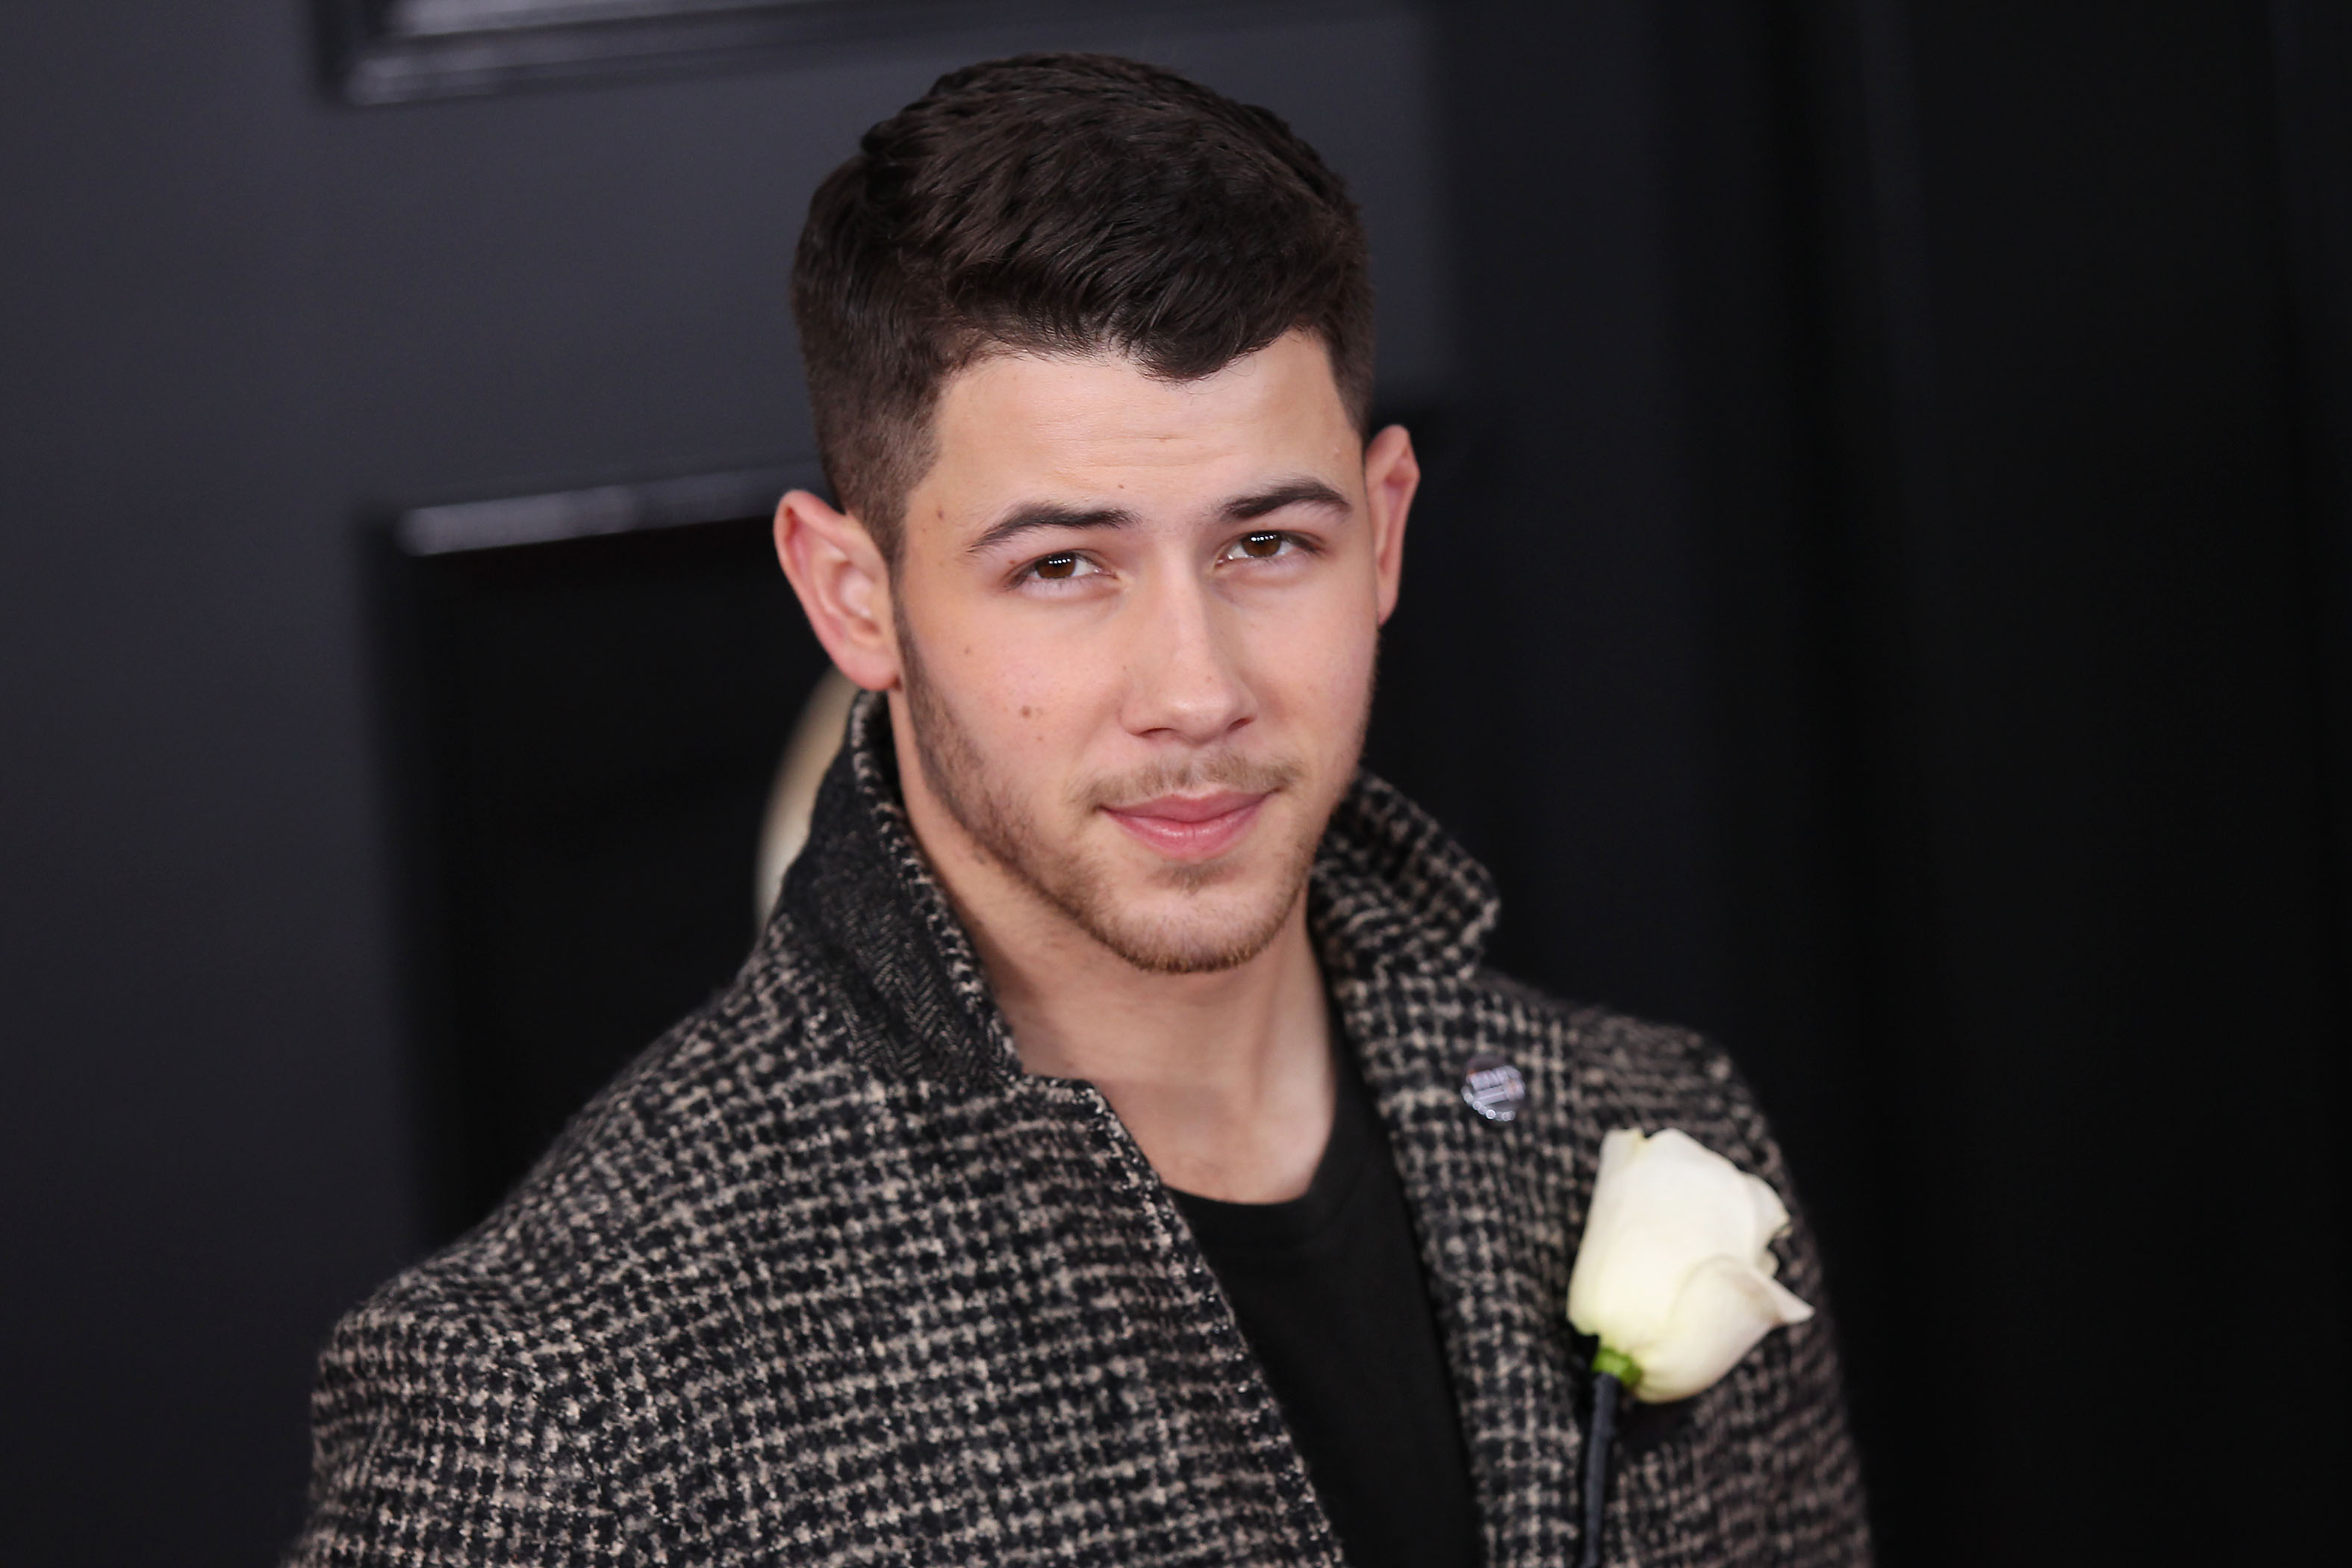 Nick Jonas to Serve as a Coach on “The Voice”